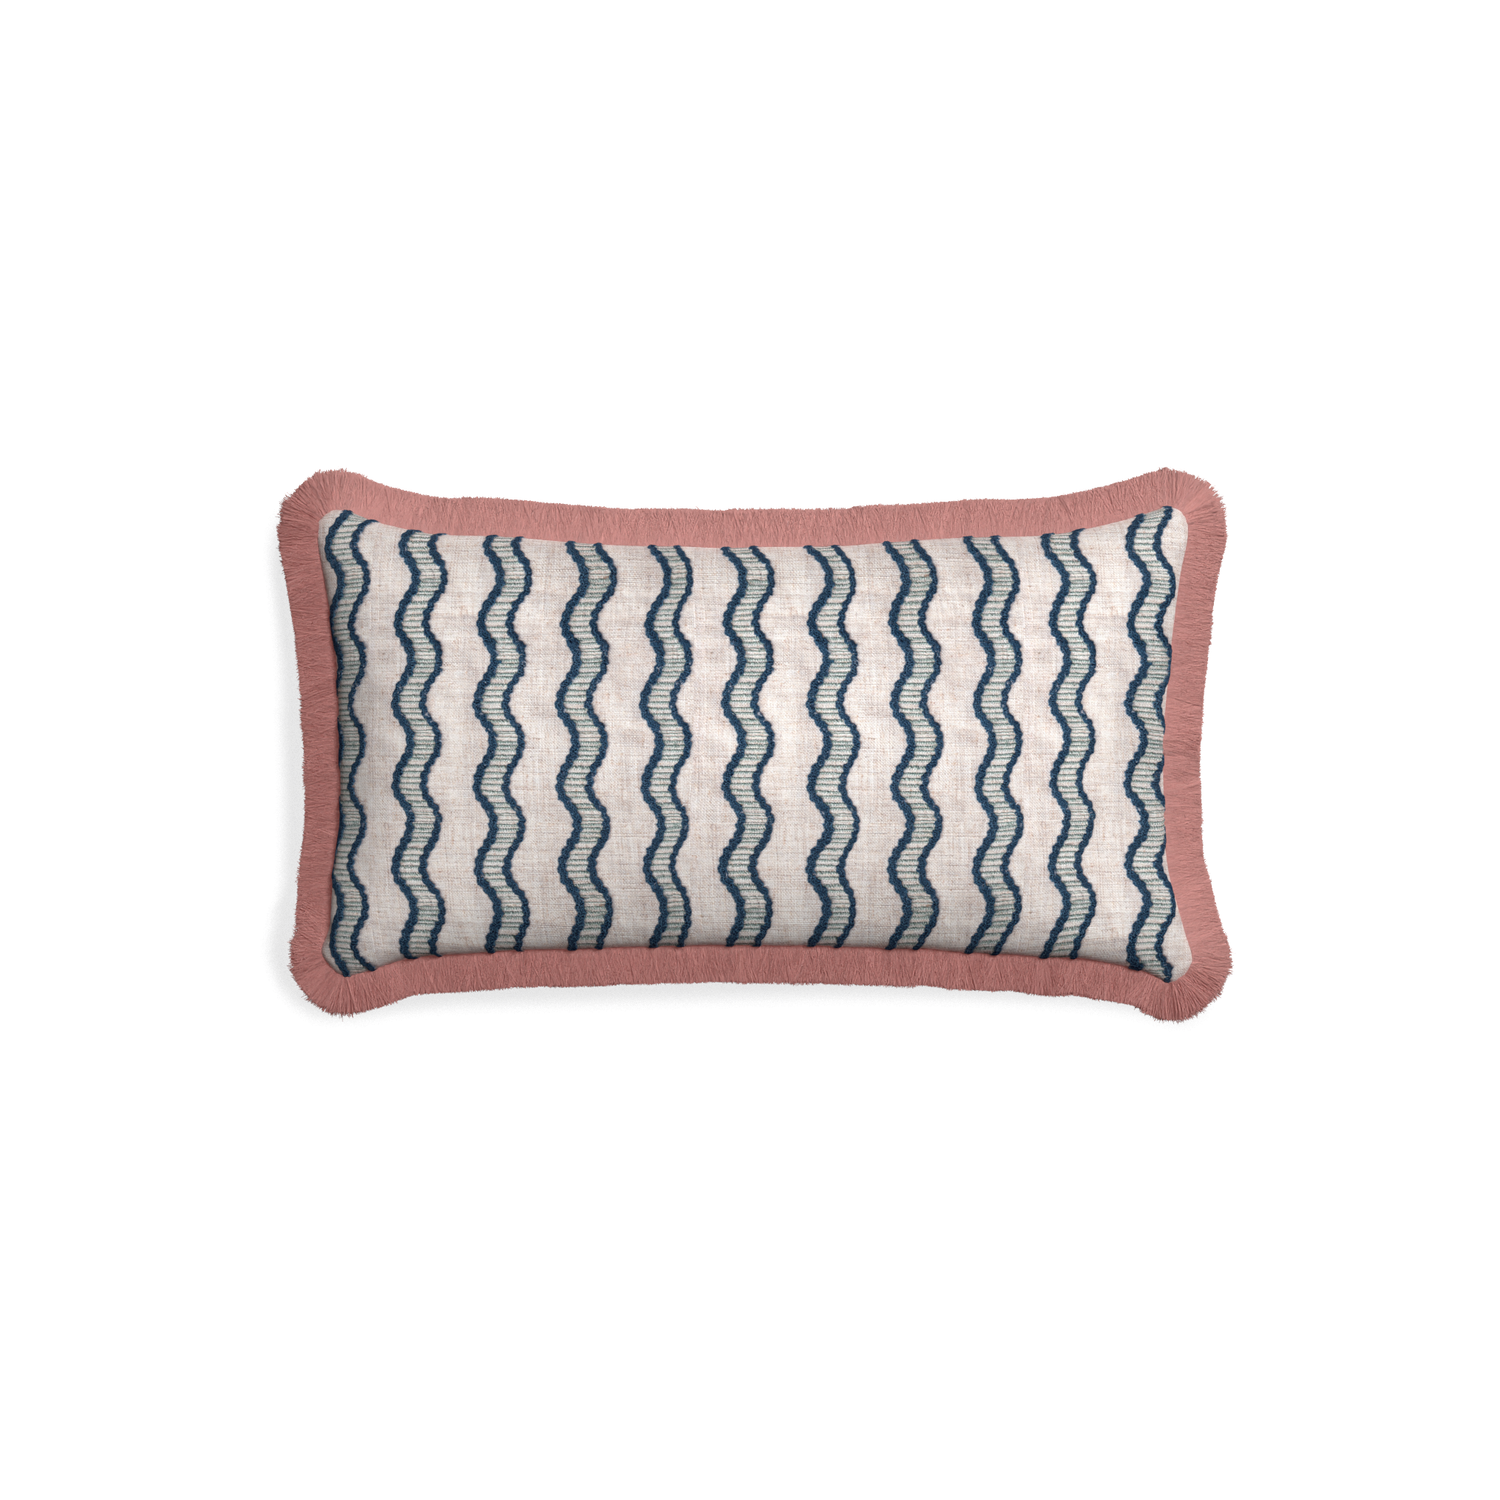 Petite-lumbar beatrice custom embroidered wavepillow with d fringe on white background